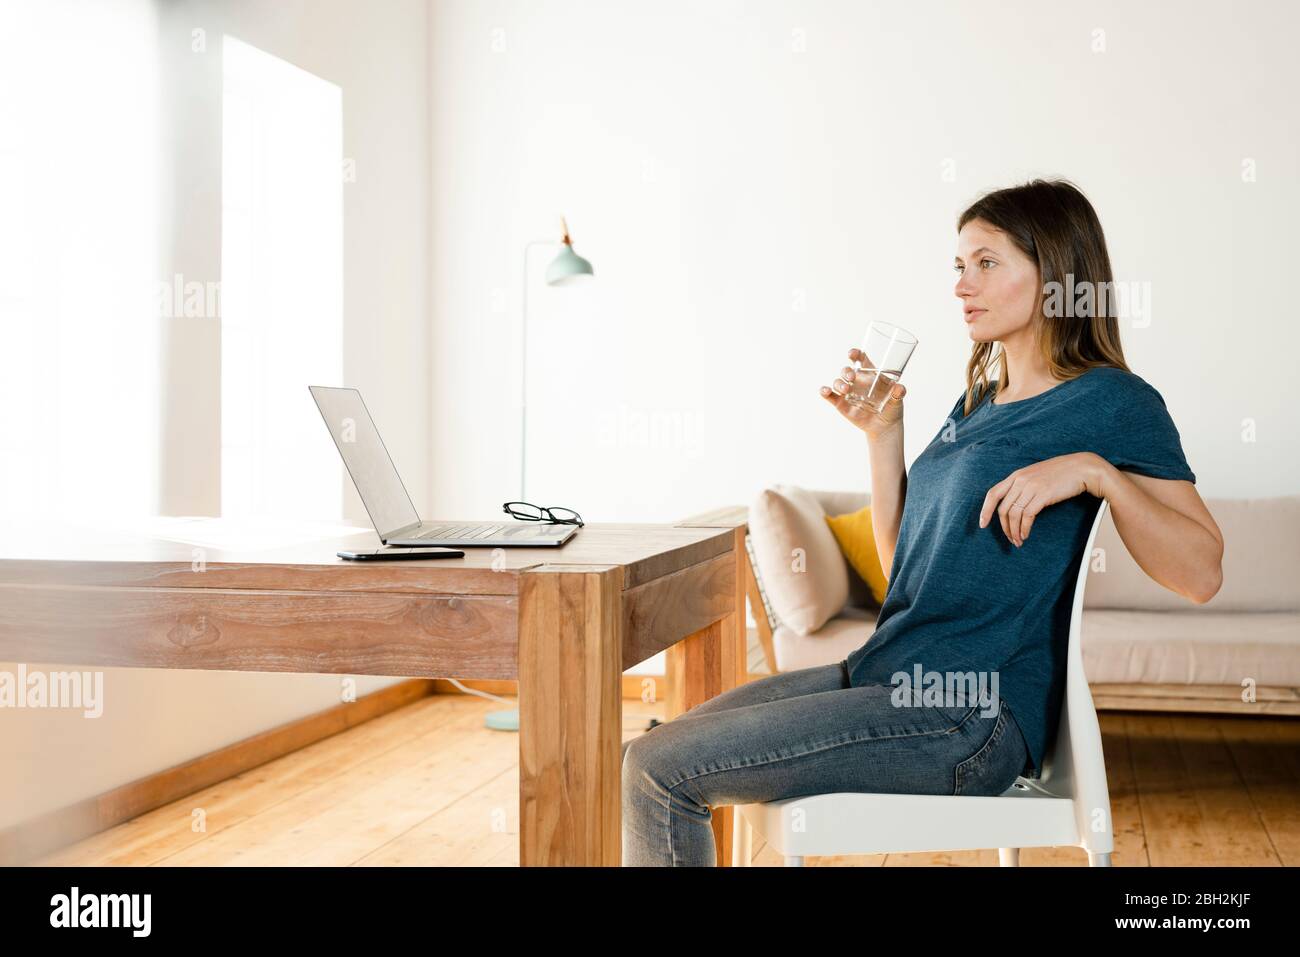 Young woman drinking a galss of water and having a break from working at laptop in home office Stock Photo